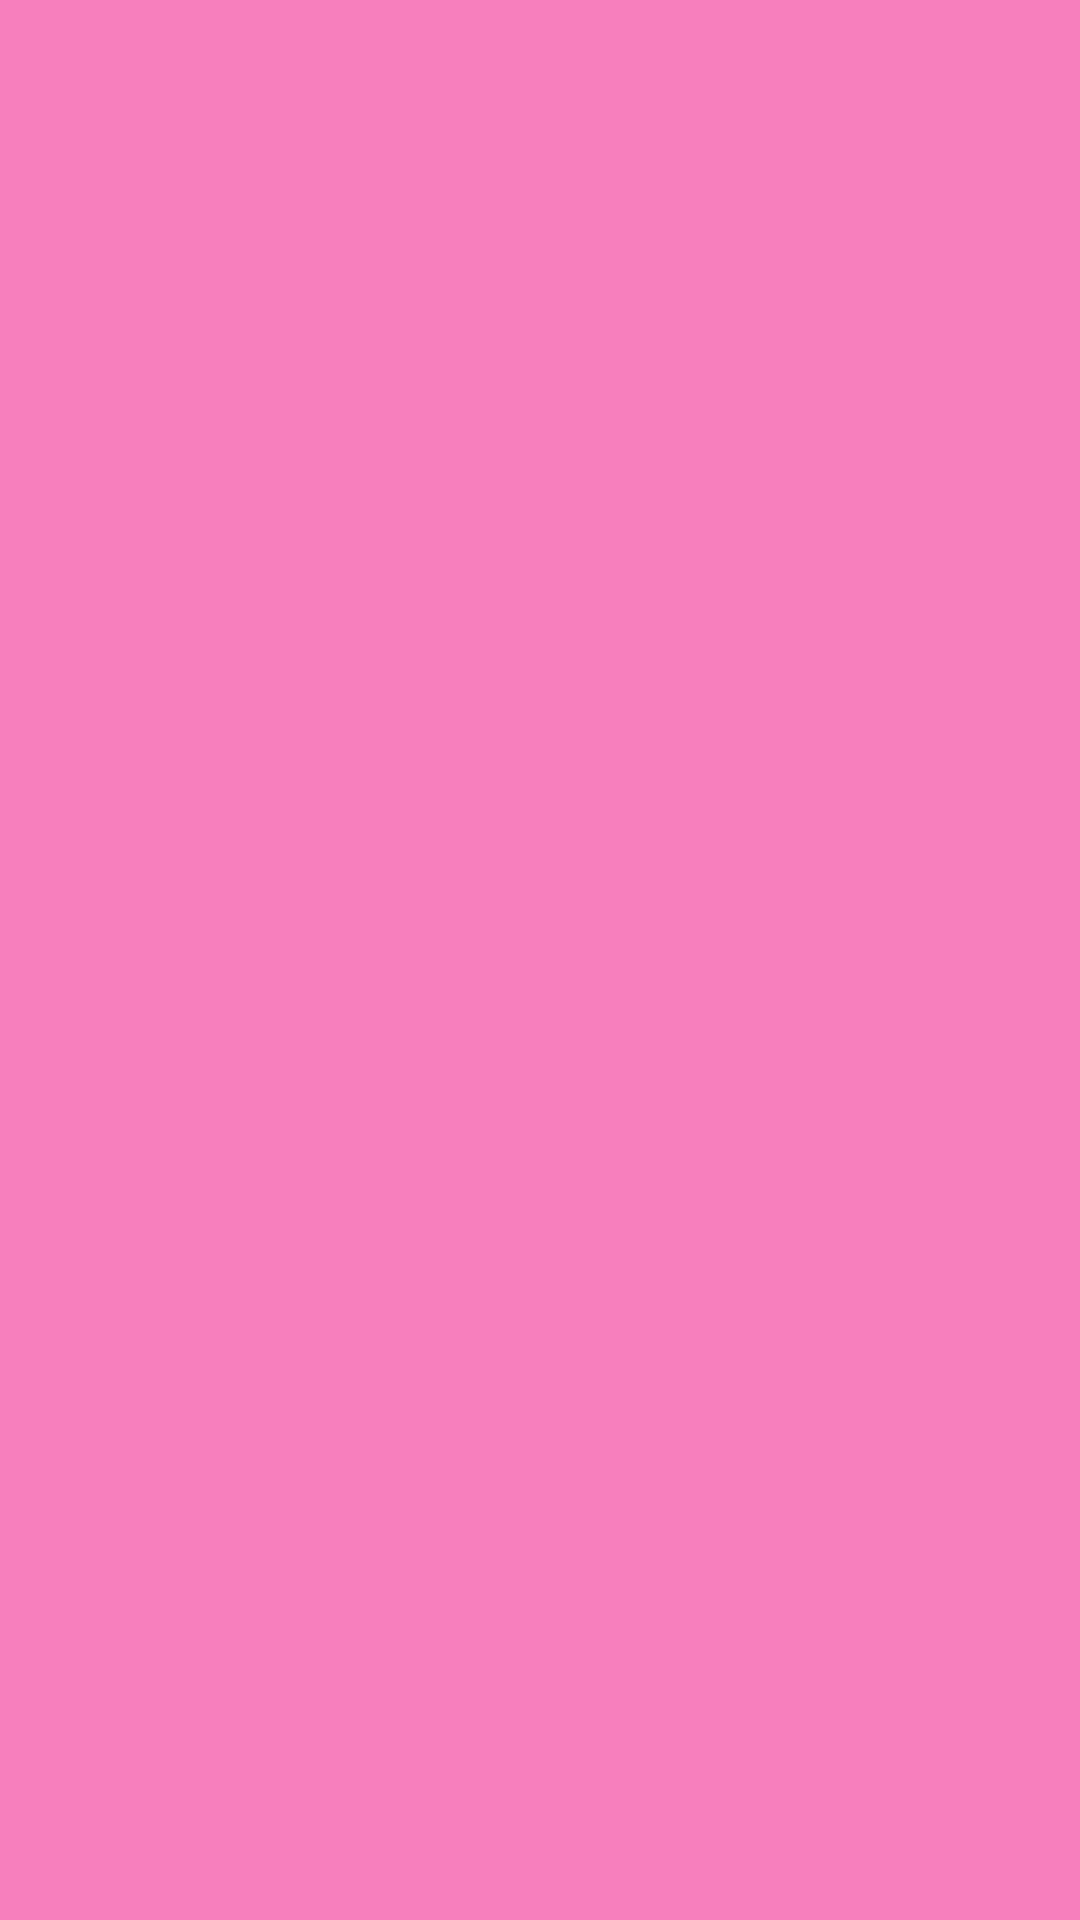 1080x1920 Persian Pink Solid Color Background